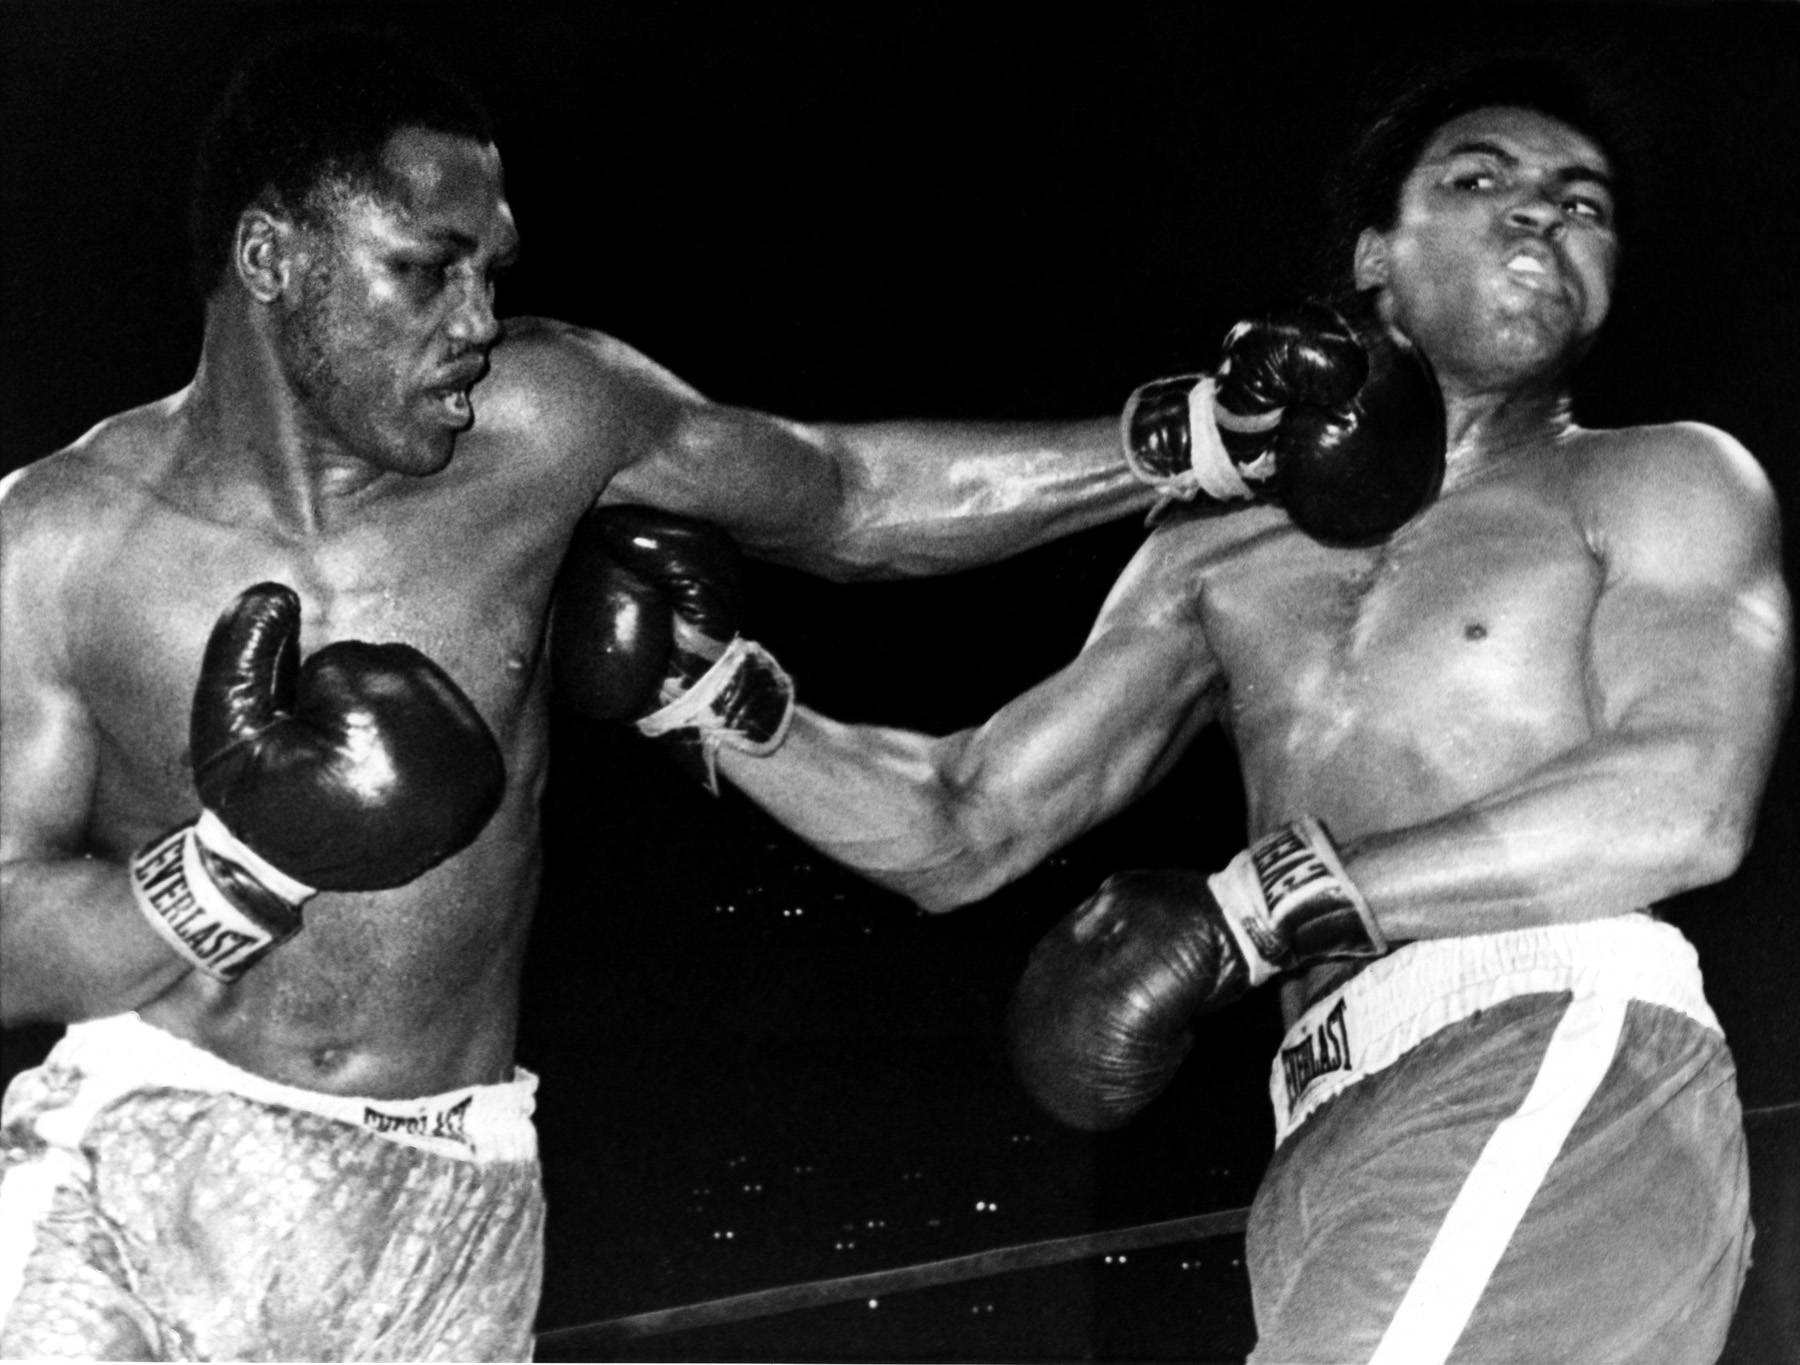 Comeback and the Fight of the Century - After a three-and-a-half year hiatus, Ali returned to the ring in 1970. The next year, in what has been hailed as “The Fight of the Century,” Ali took on legendary opponent Joe Frazier. After 15 rounds, Frazier scored a knockout, taking down the former heavyweight champion. The two would meet again in 1974, in which Ali would be the victor.&nbsp;(Photo: B Bennett/Getty Images)